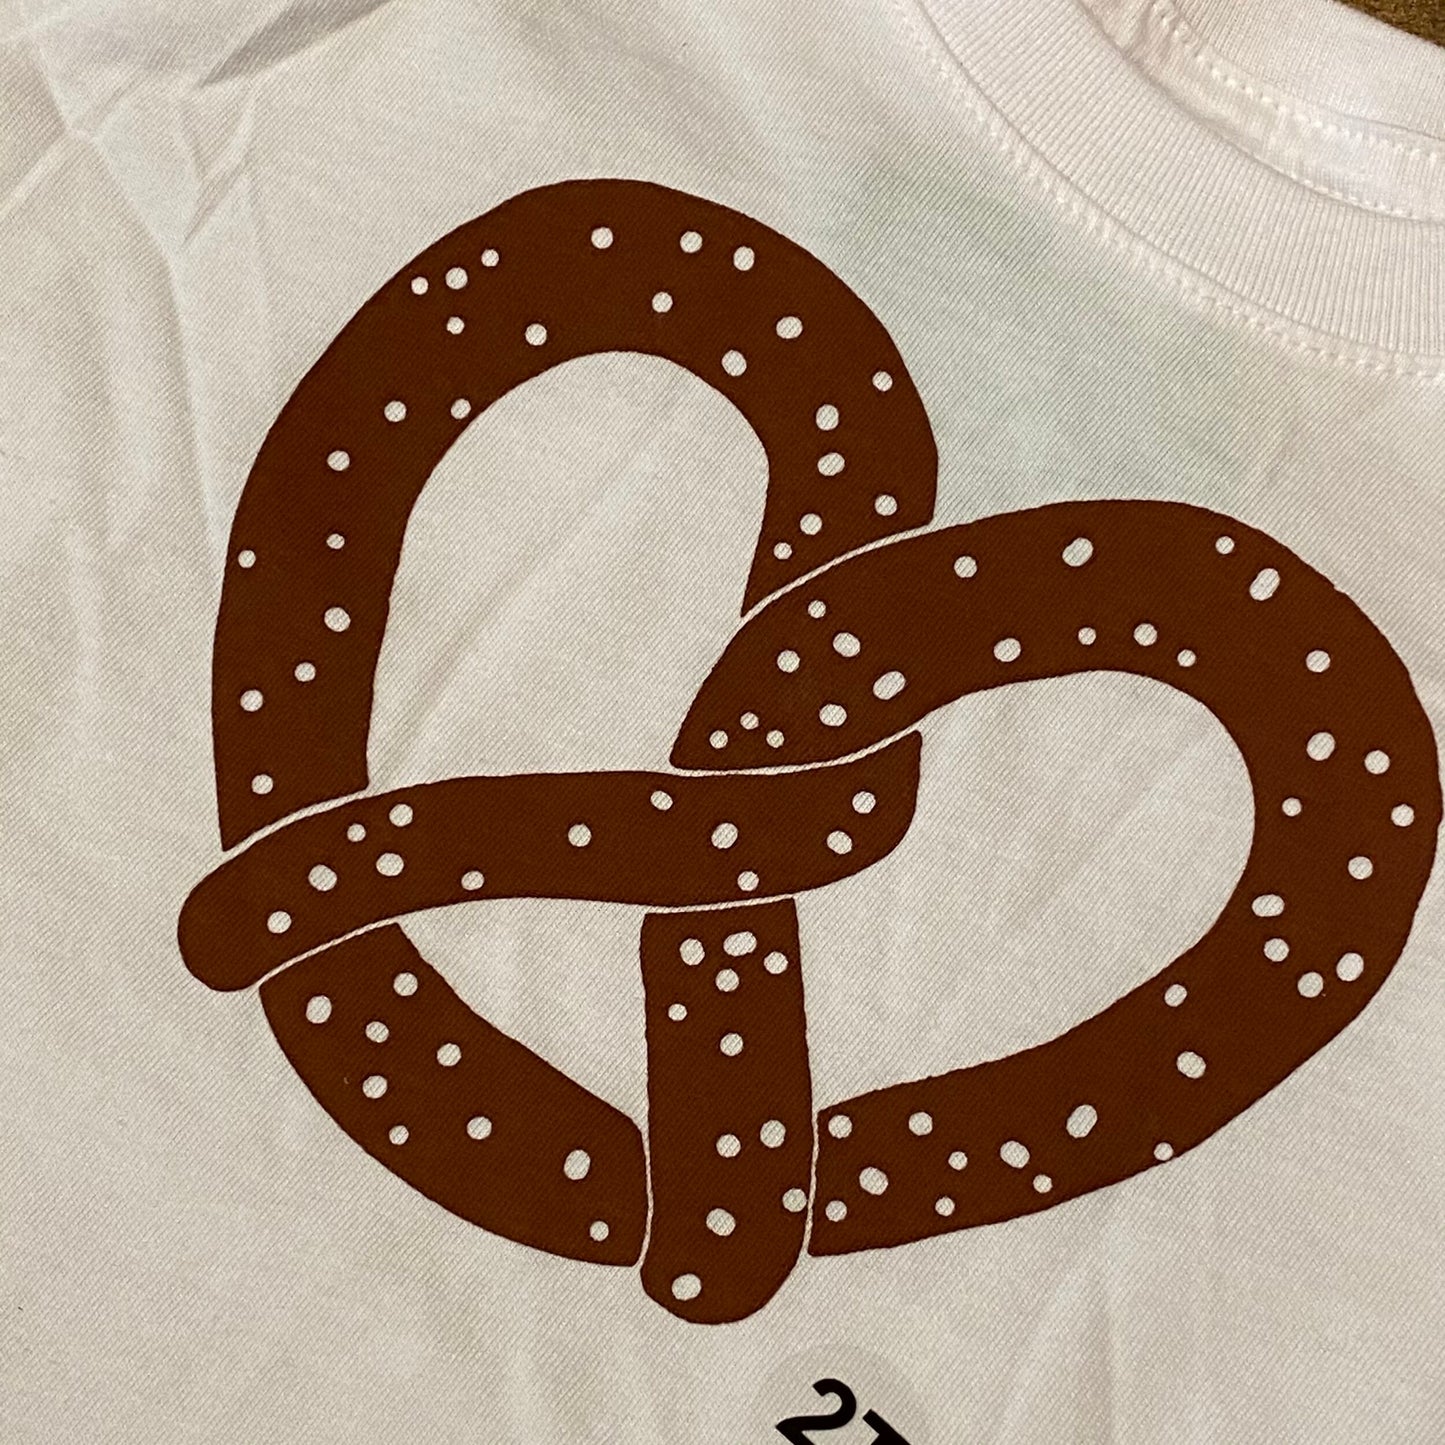 A graphic print of a brown Philly pretzel with white dots on a 100% cotton exit343design Toddler T-Shirt.